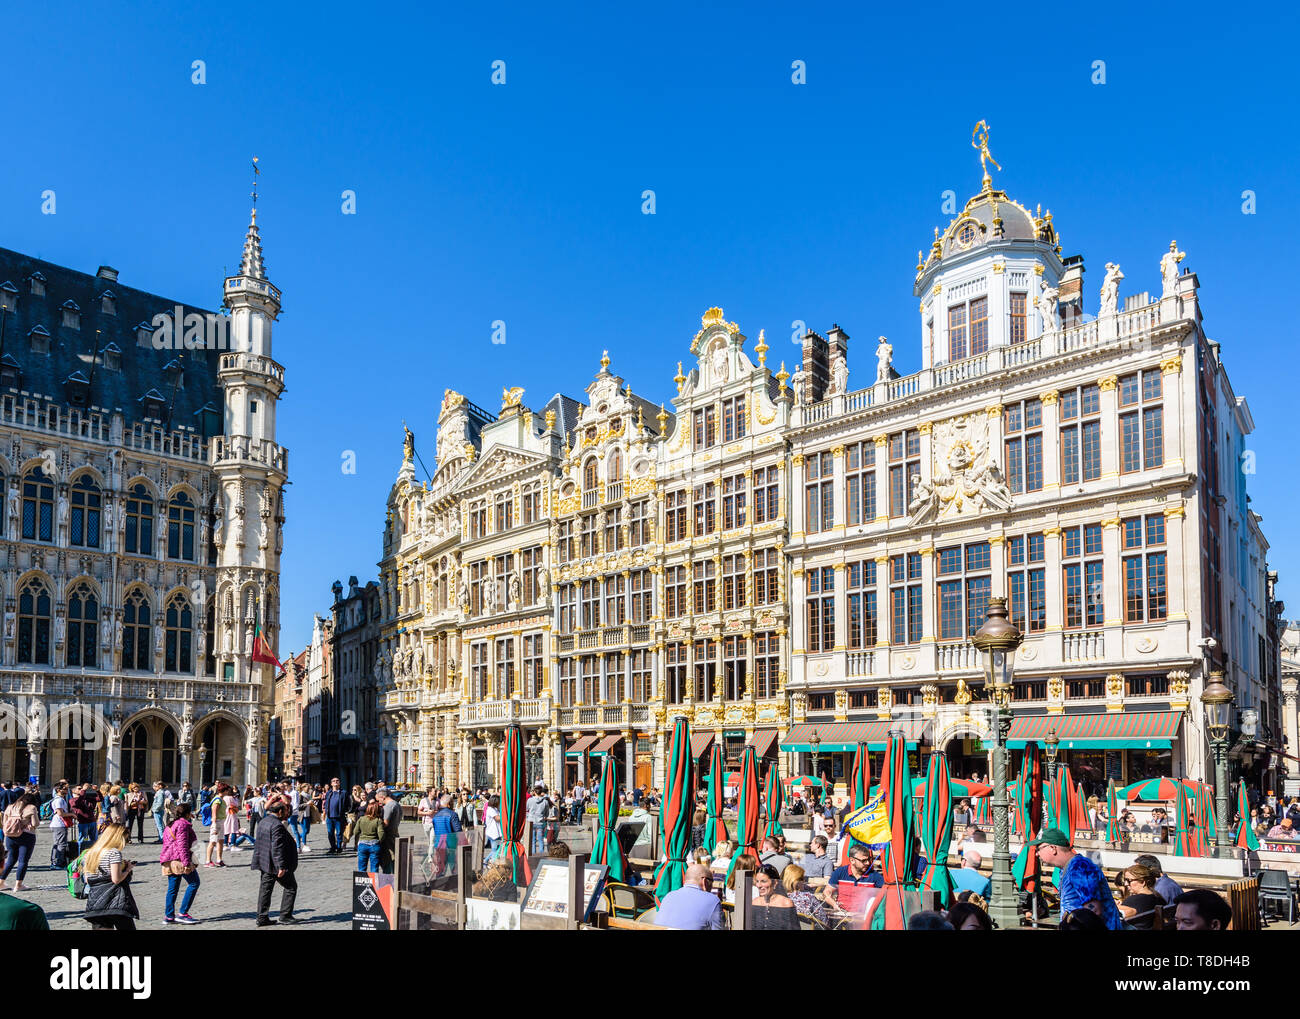 The Grand Place in Brussels, Belgium, is lined by opulent guild houses, with richly decorated facades, and by terraces of cafes and restaurants. Stock Photo